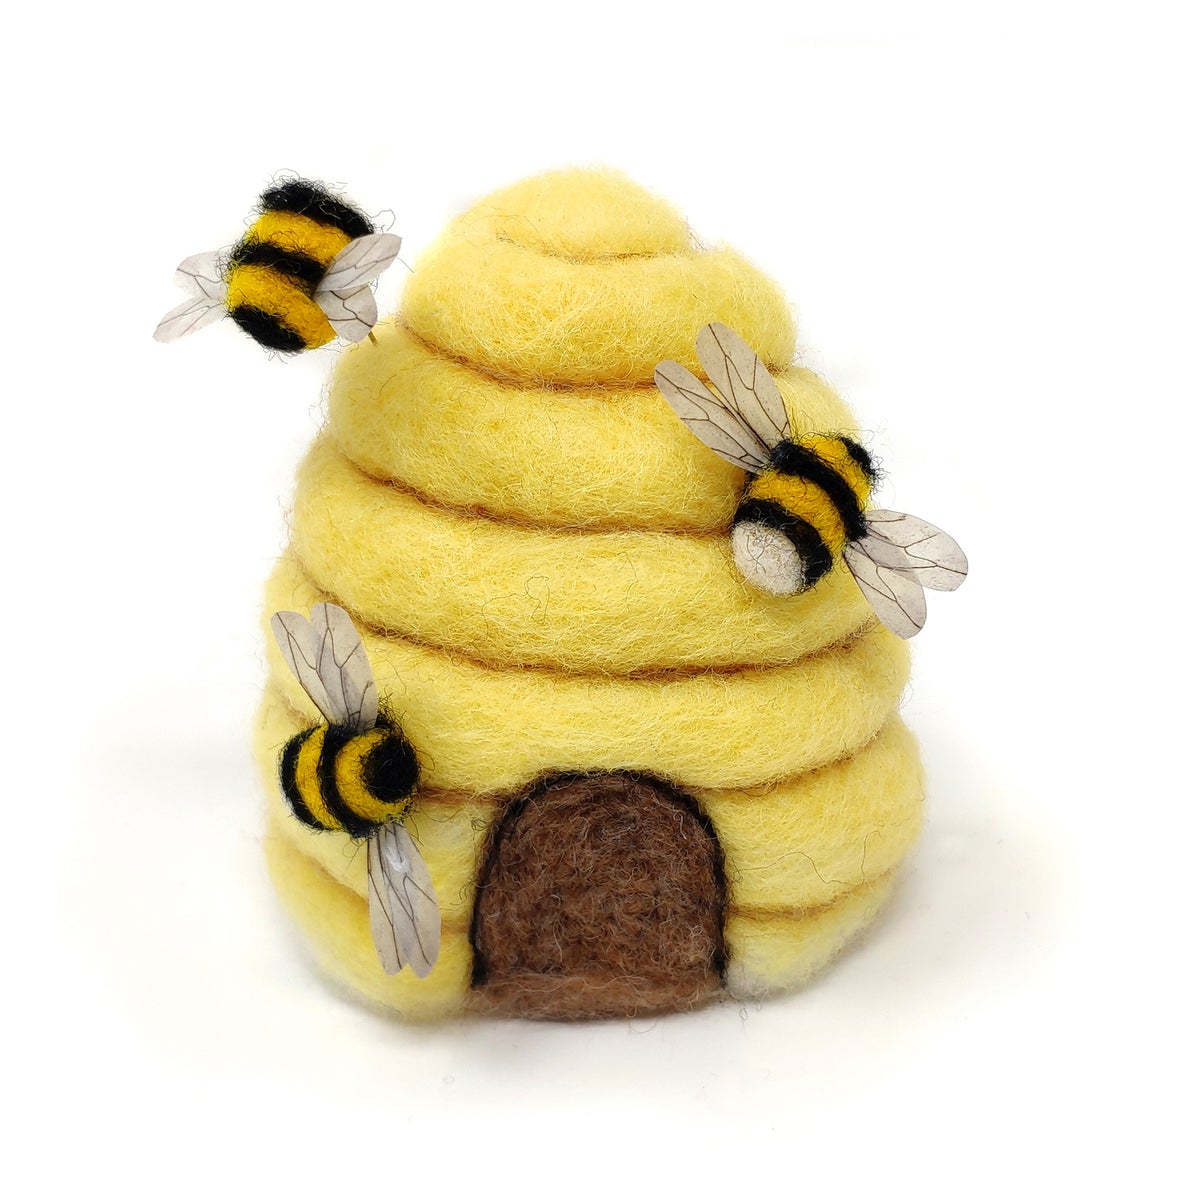 needle felt beehive craft kit image of completed beehive and honey bees